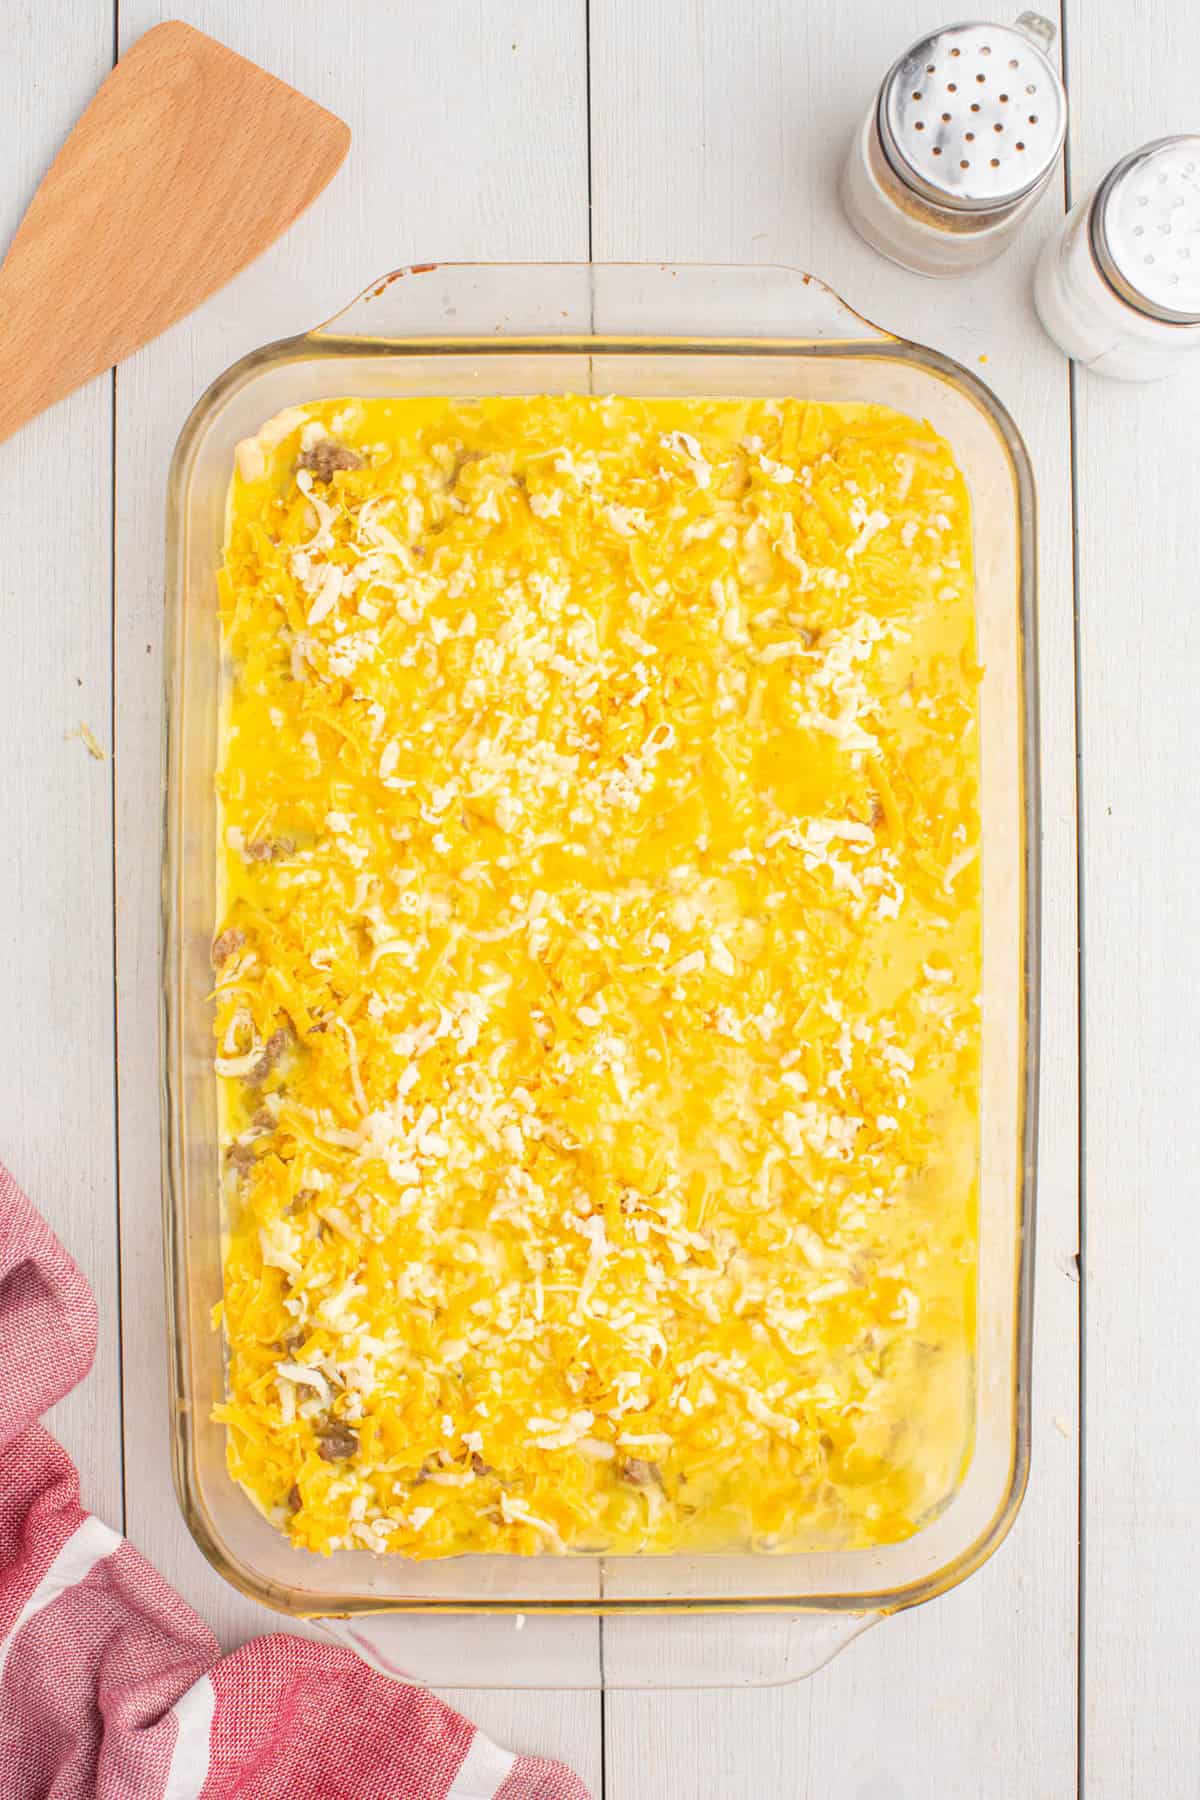 Topping Crescent Roll Egg Bake with Cheese in 9x13 Baking Dish